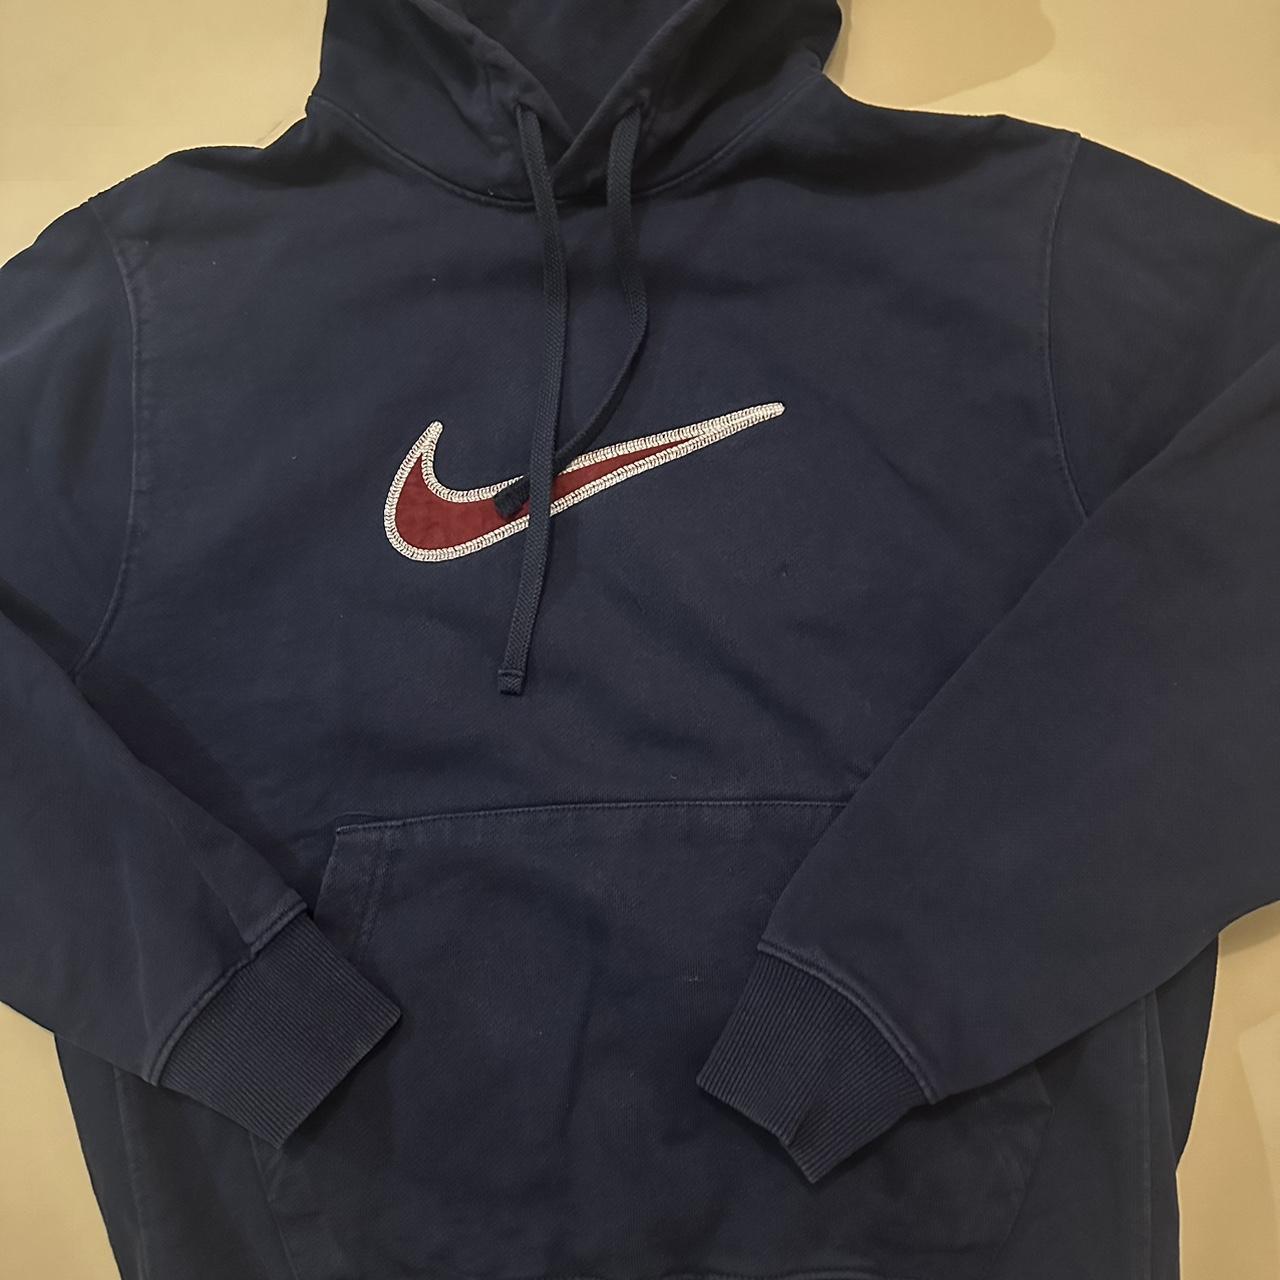 Nike sweater. Thick fabric but very warm. Has no... - Depop